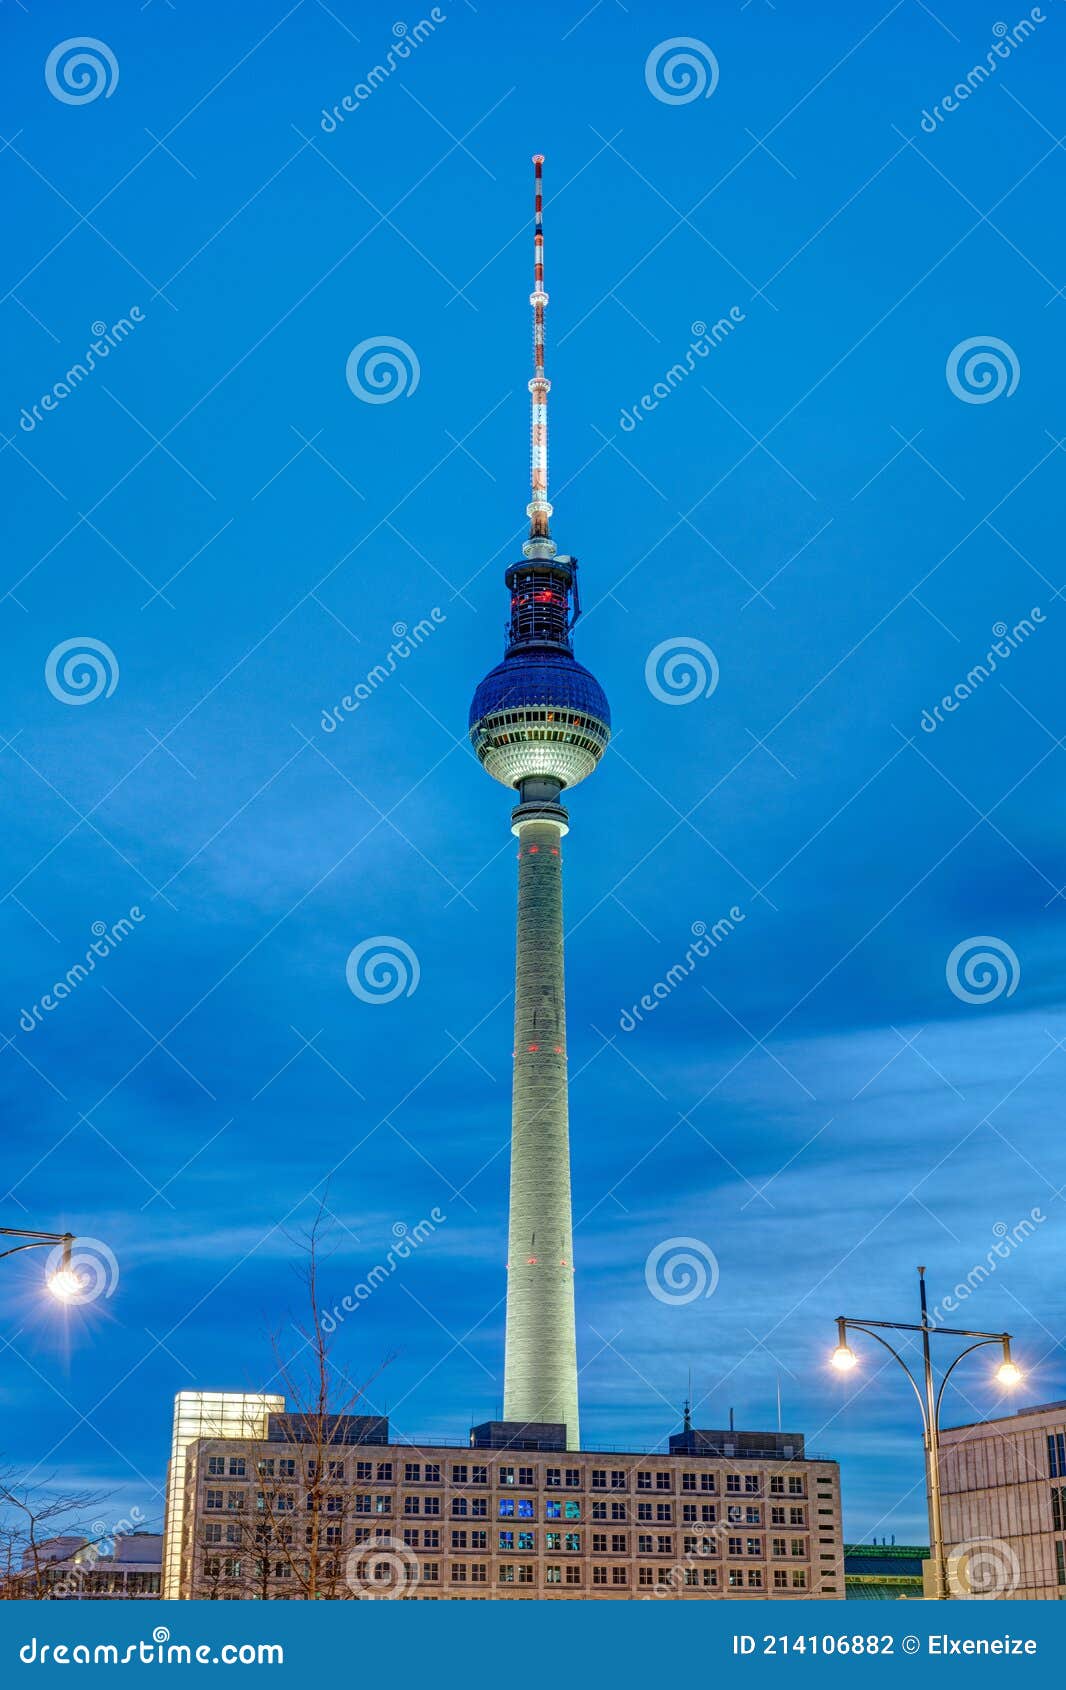 the famous televison tower of berlin